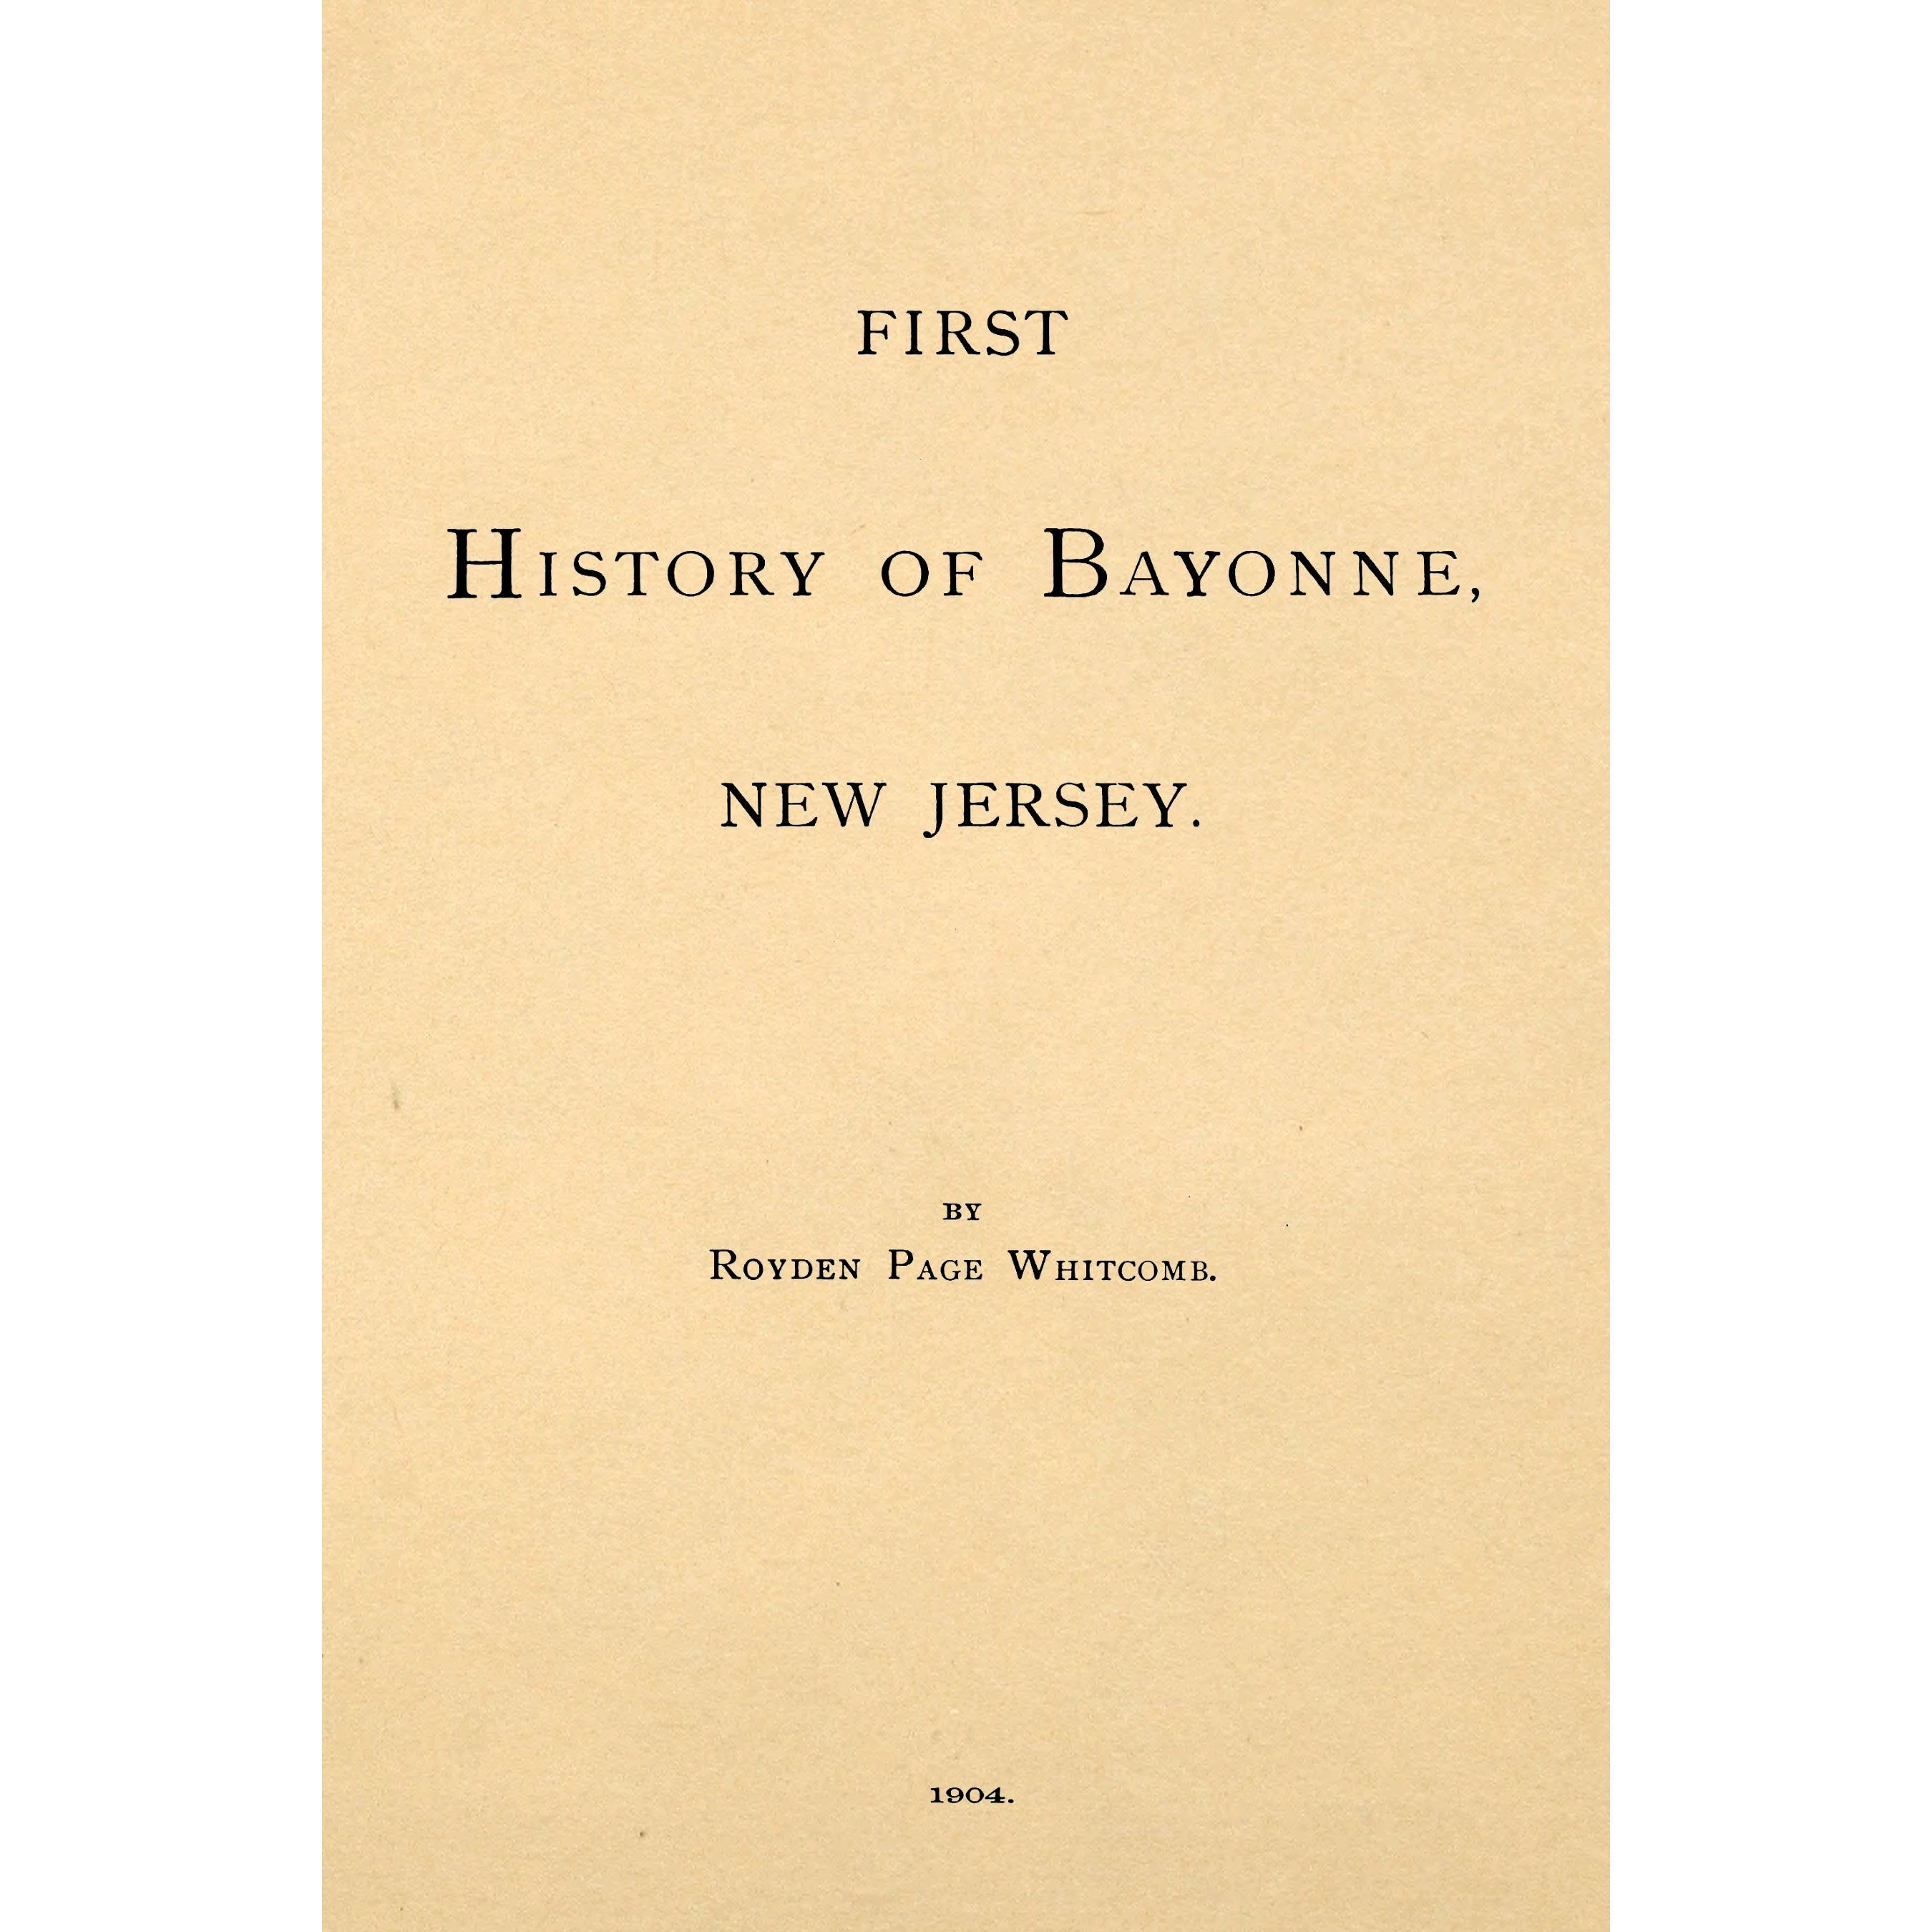 First history of Bayonne, New Jersey